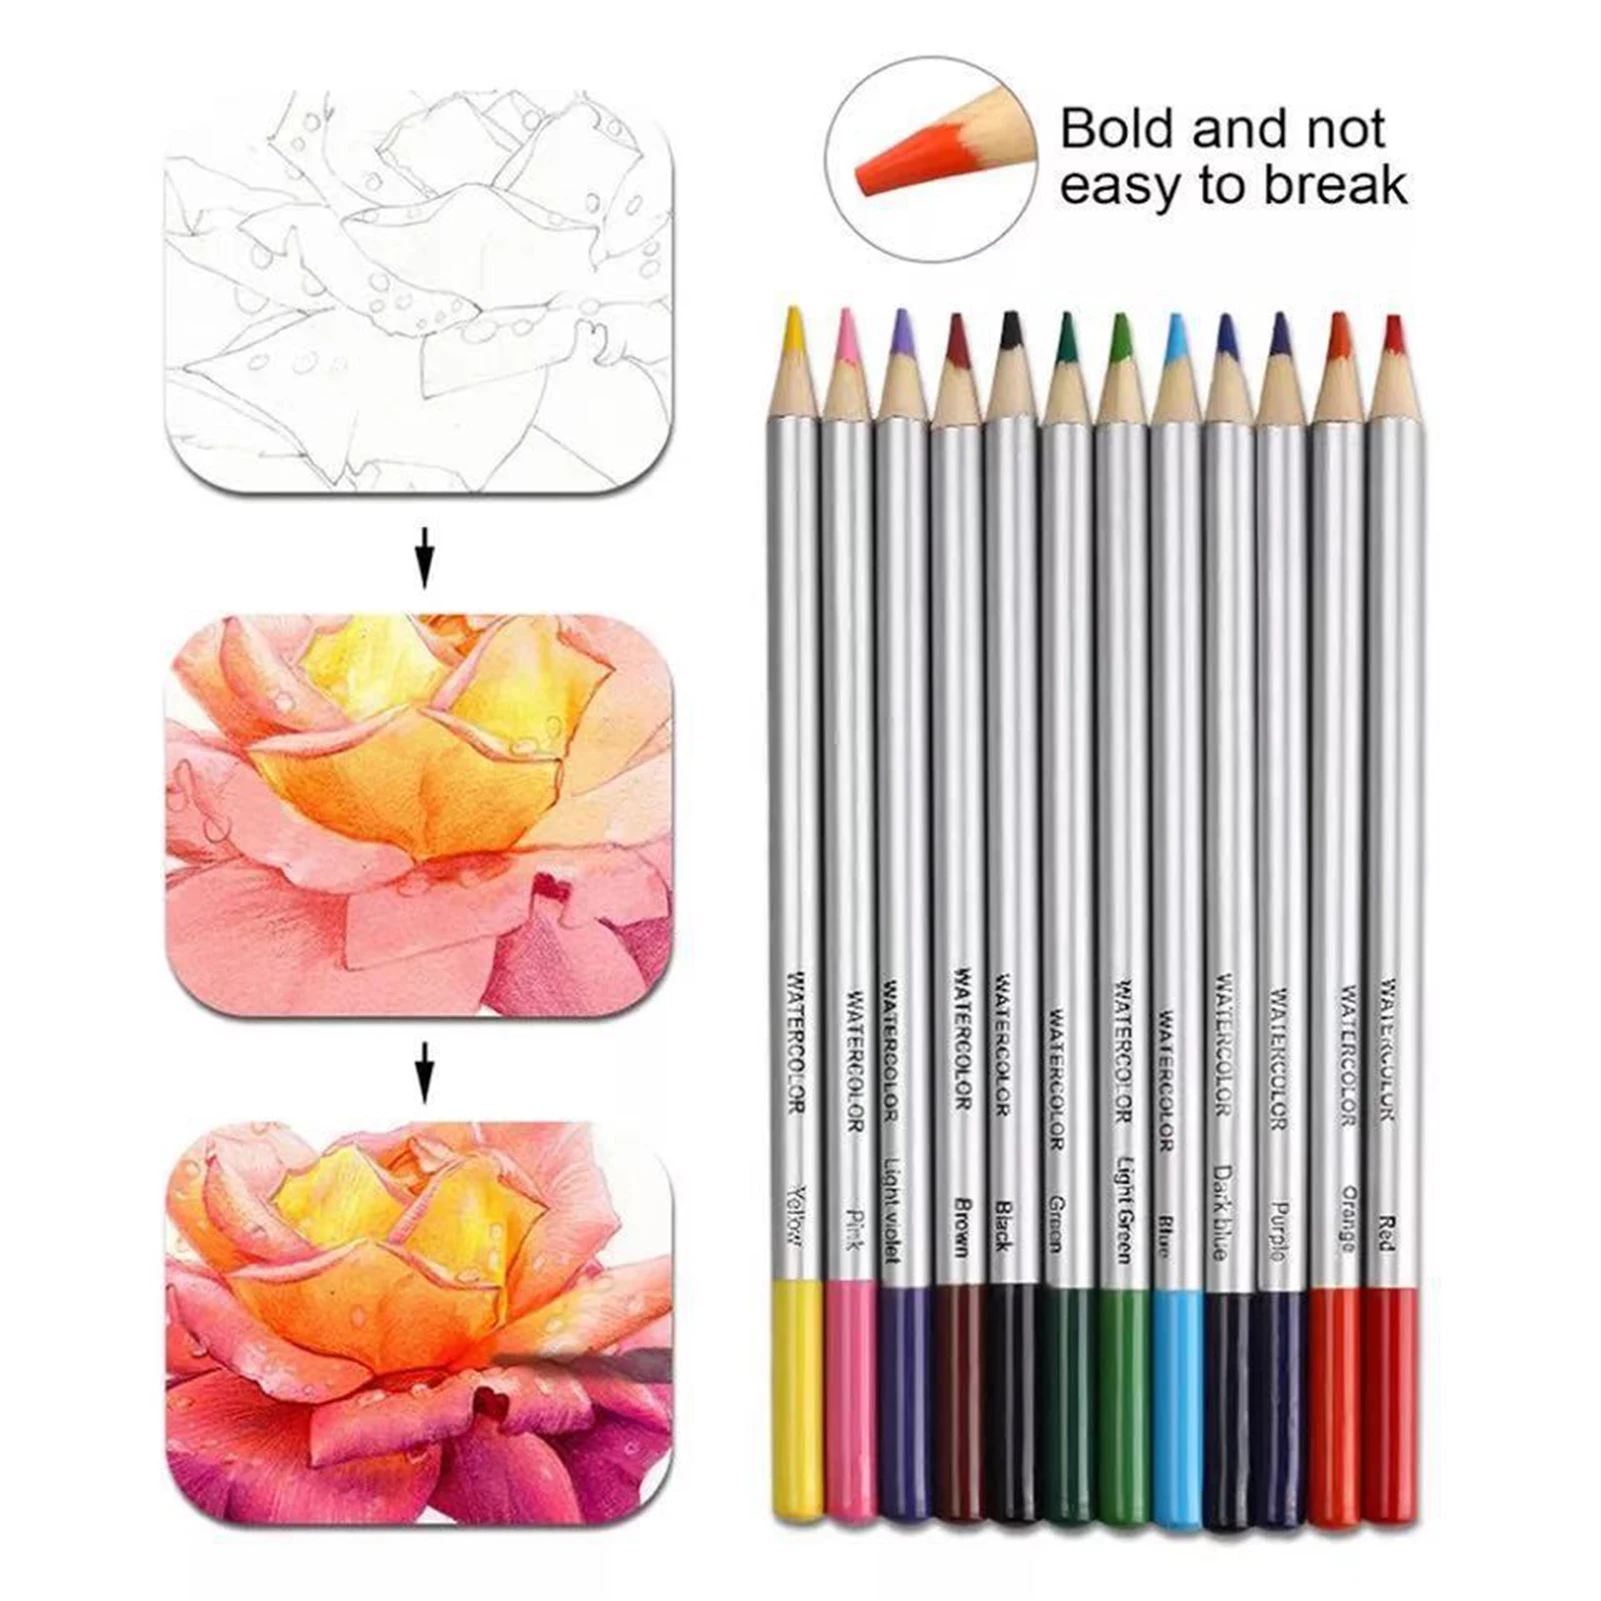 51-Piece Colored Pencils Set, Drawing Pencils and Sketching Kit